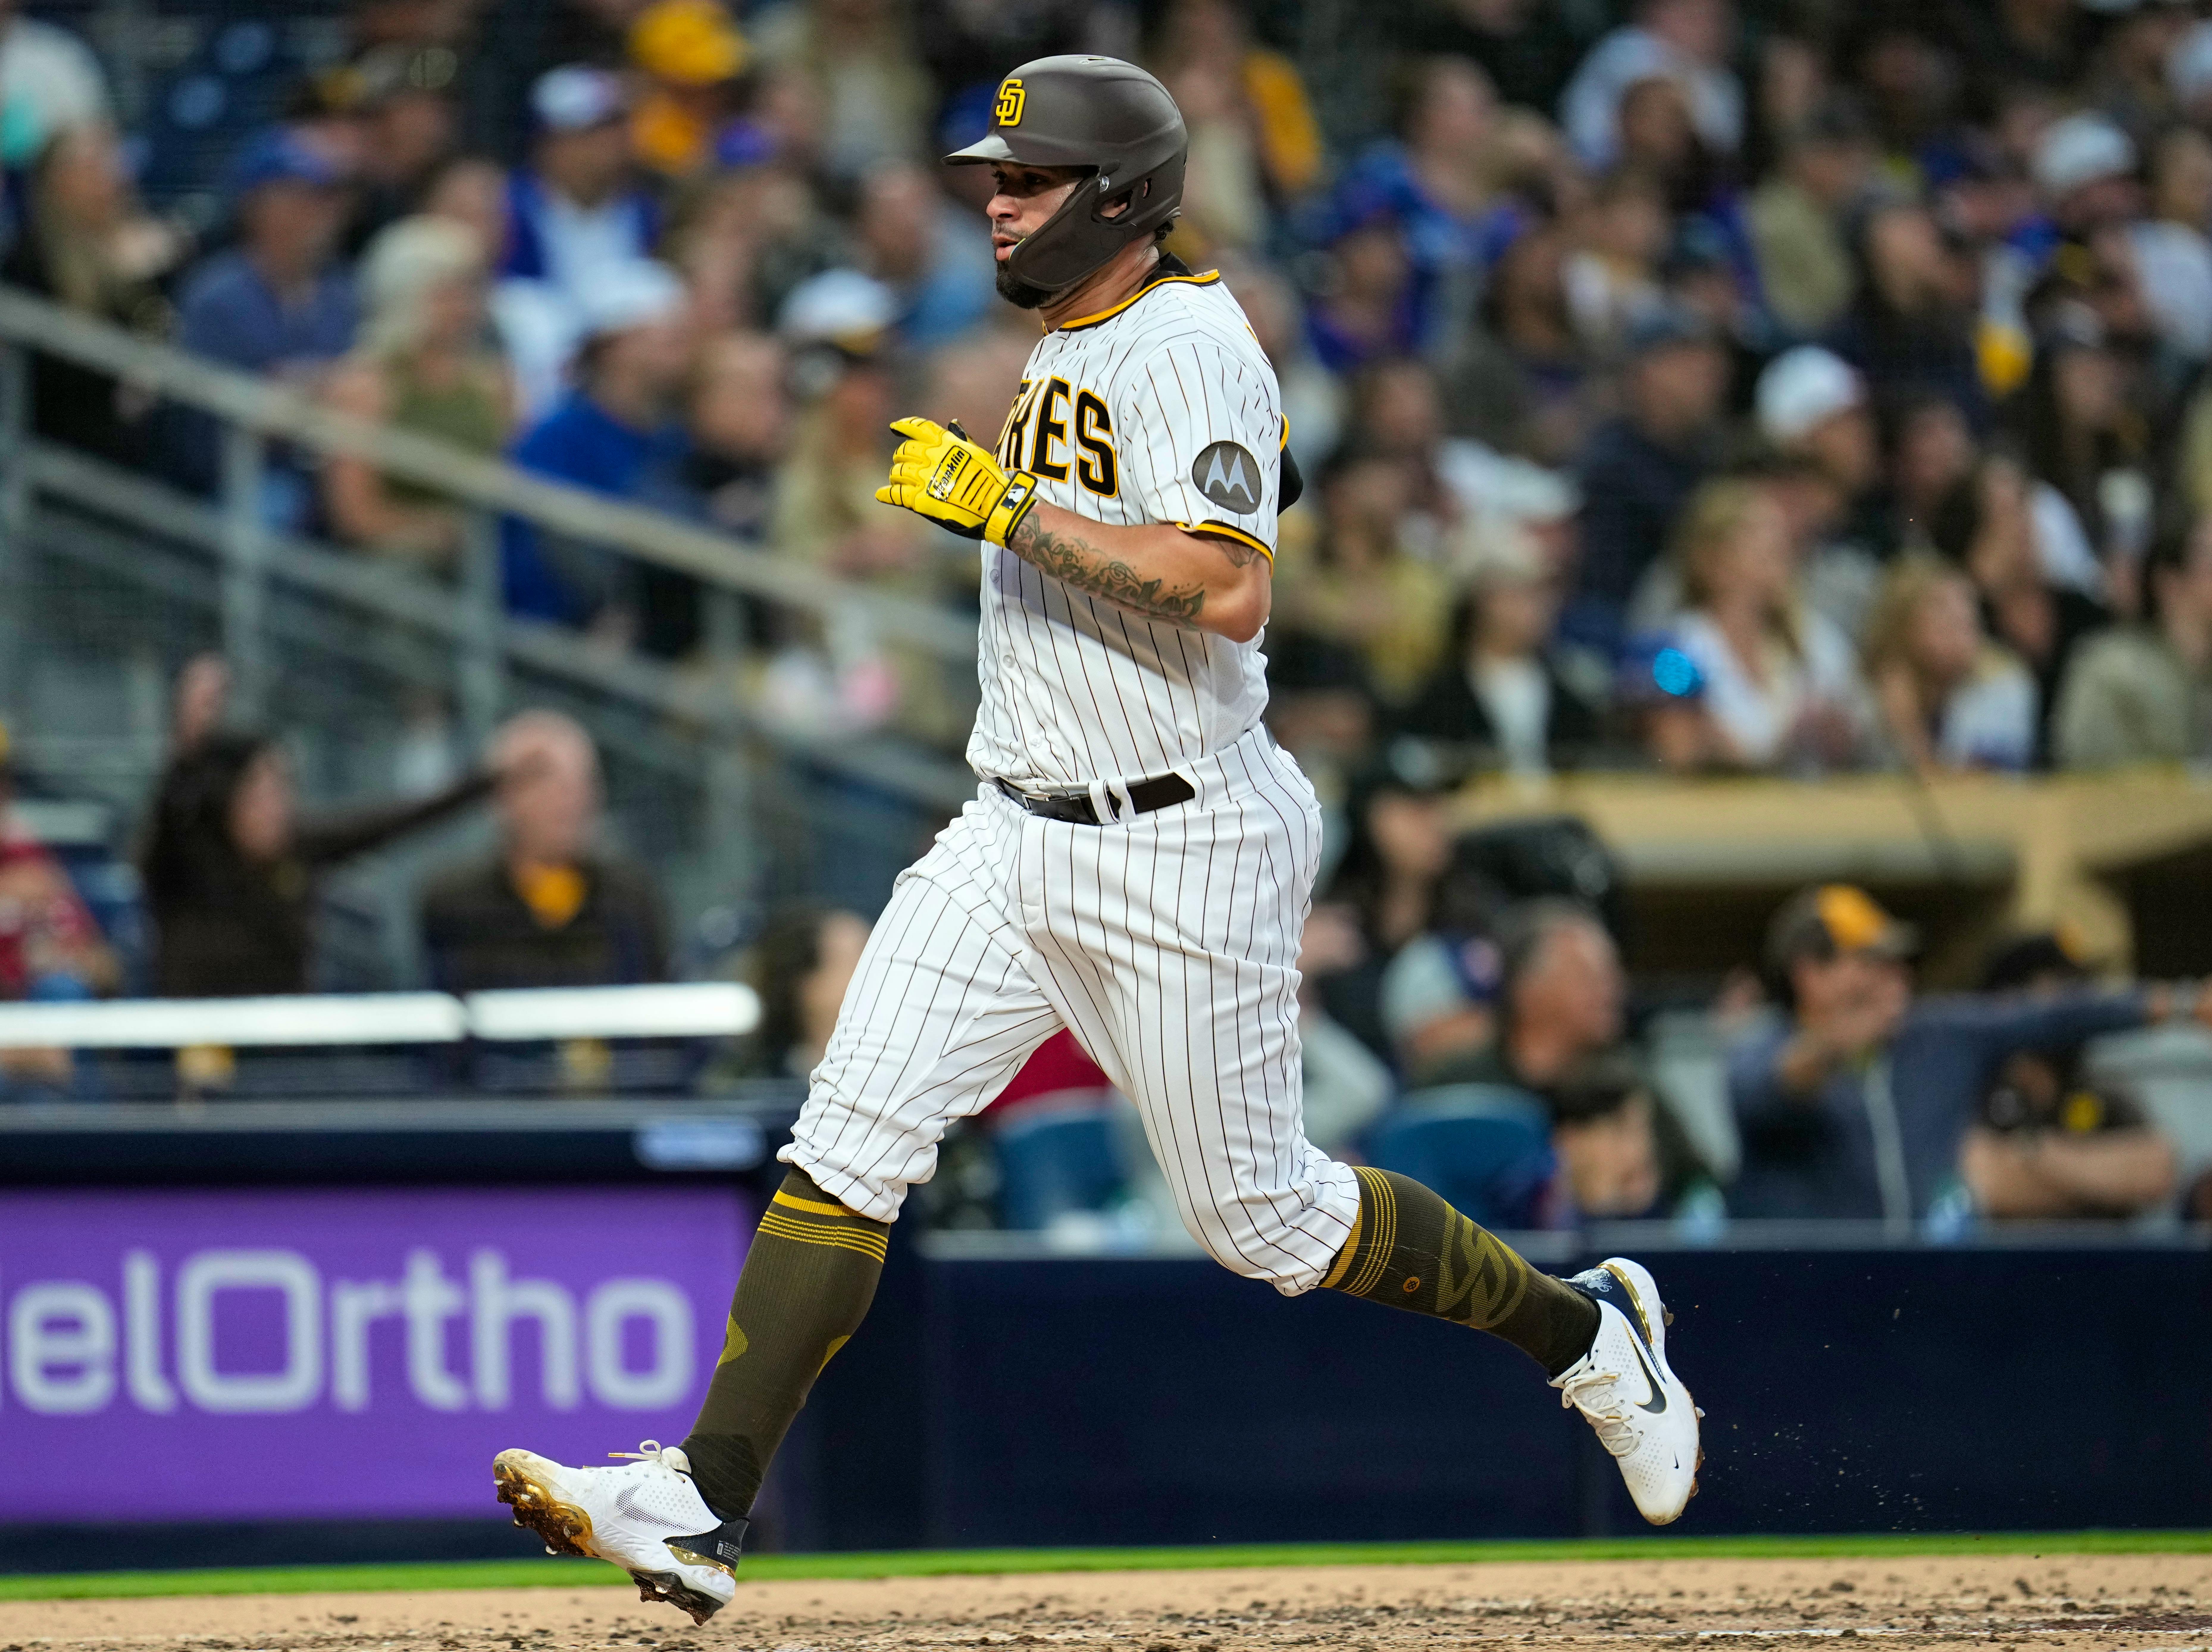 Grisham's 2-run HR in 10th gives Padres 4-2 win over Pirates